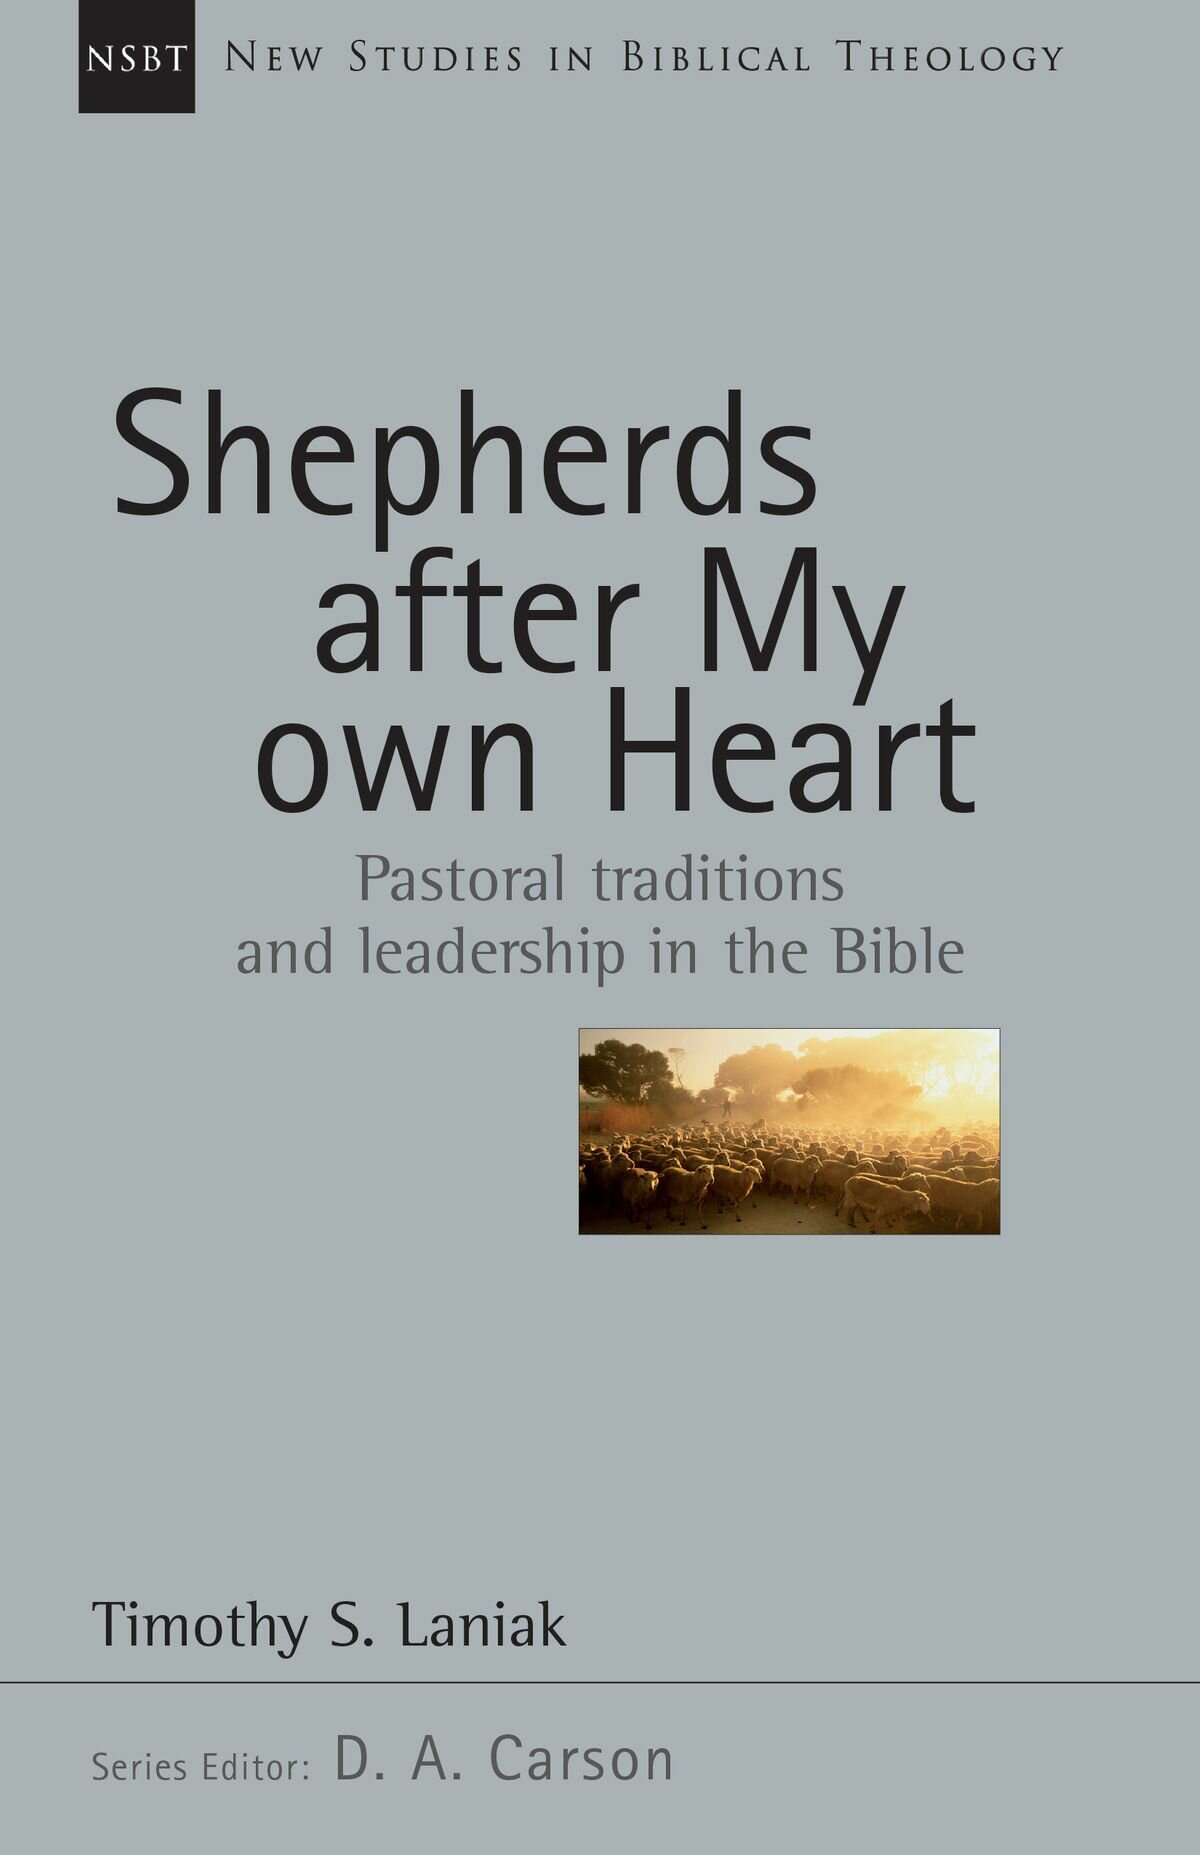 Shepherds After My Own Heart: Pastoral Traditions and Leadership in the Bible (New Studies in Biblical Theology, vol. 20 | NSBT)